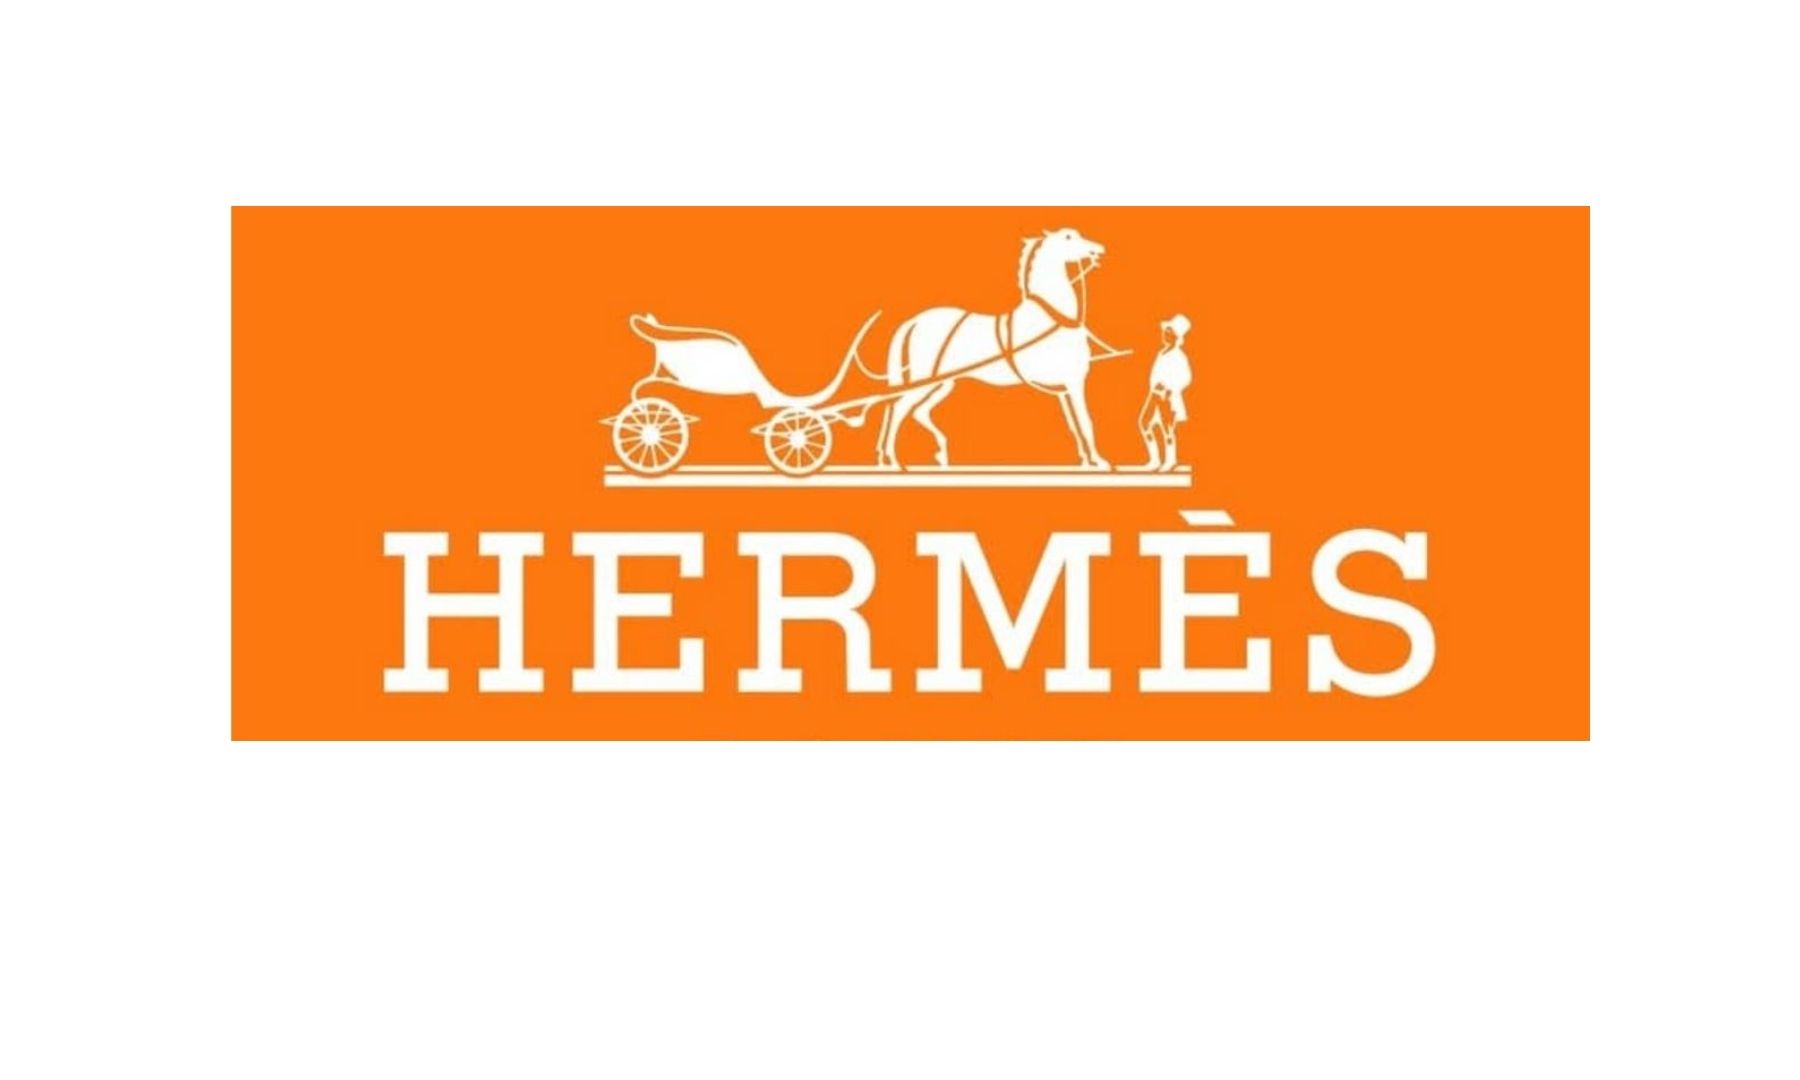 Is Hermès the greatest fashion brand of all time? - Angela van Rose